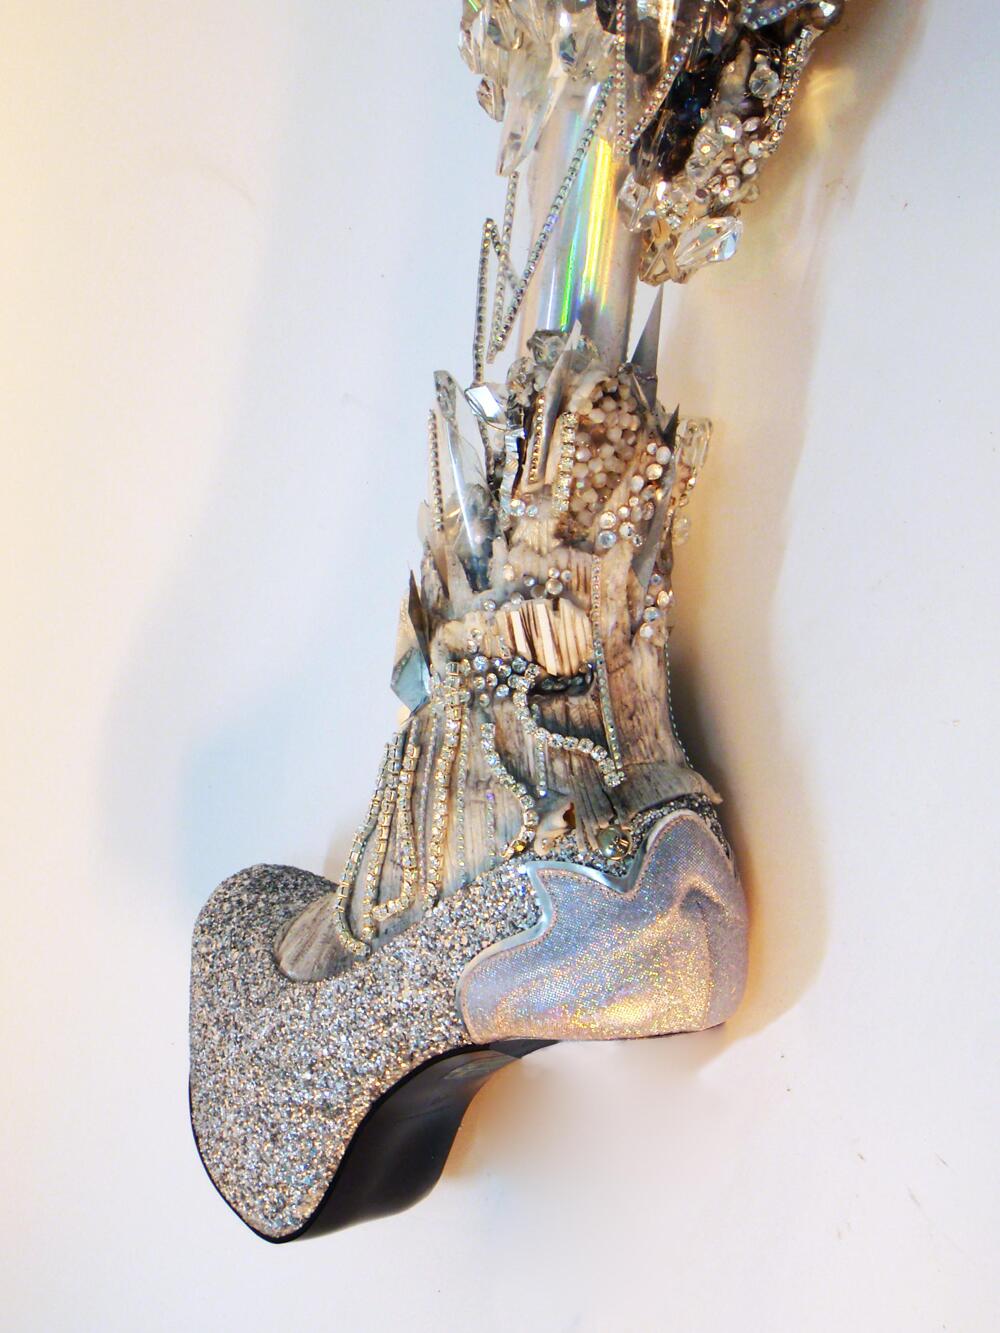 WTF of the Day - The Alternative Limb Project, Surreal Prostheses 